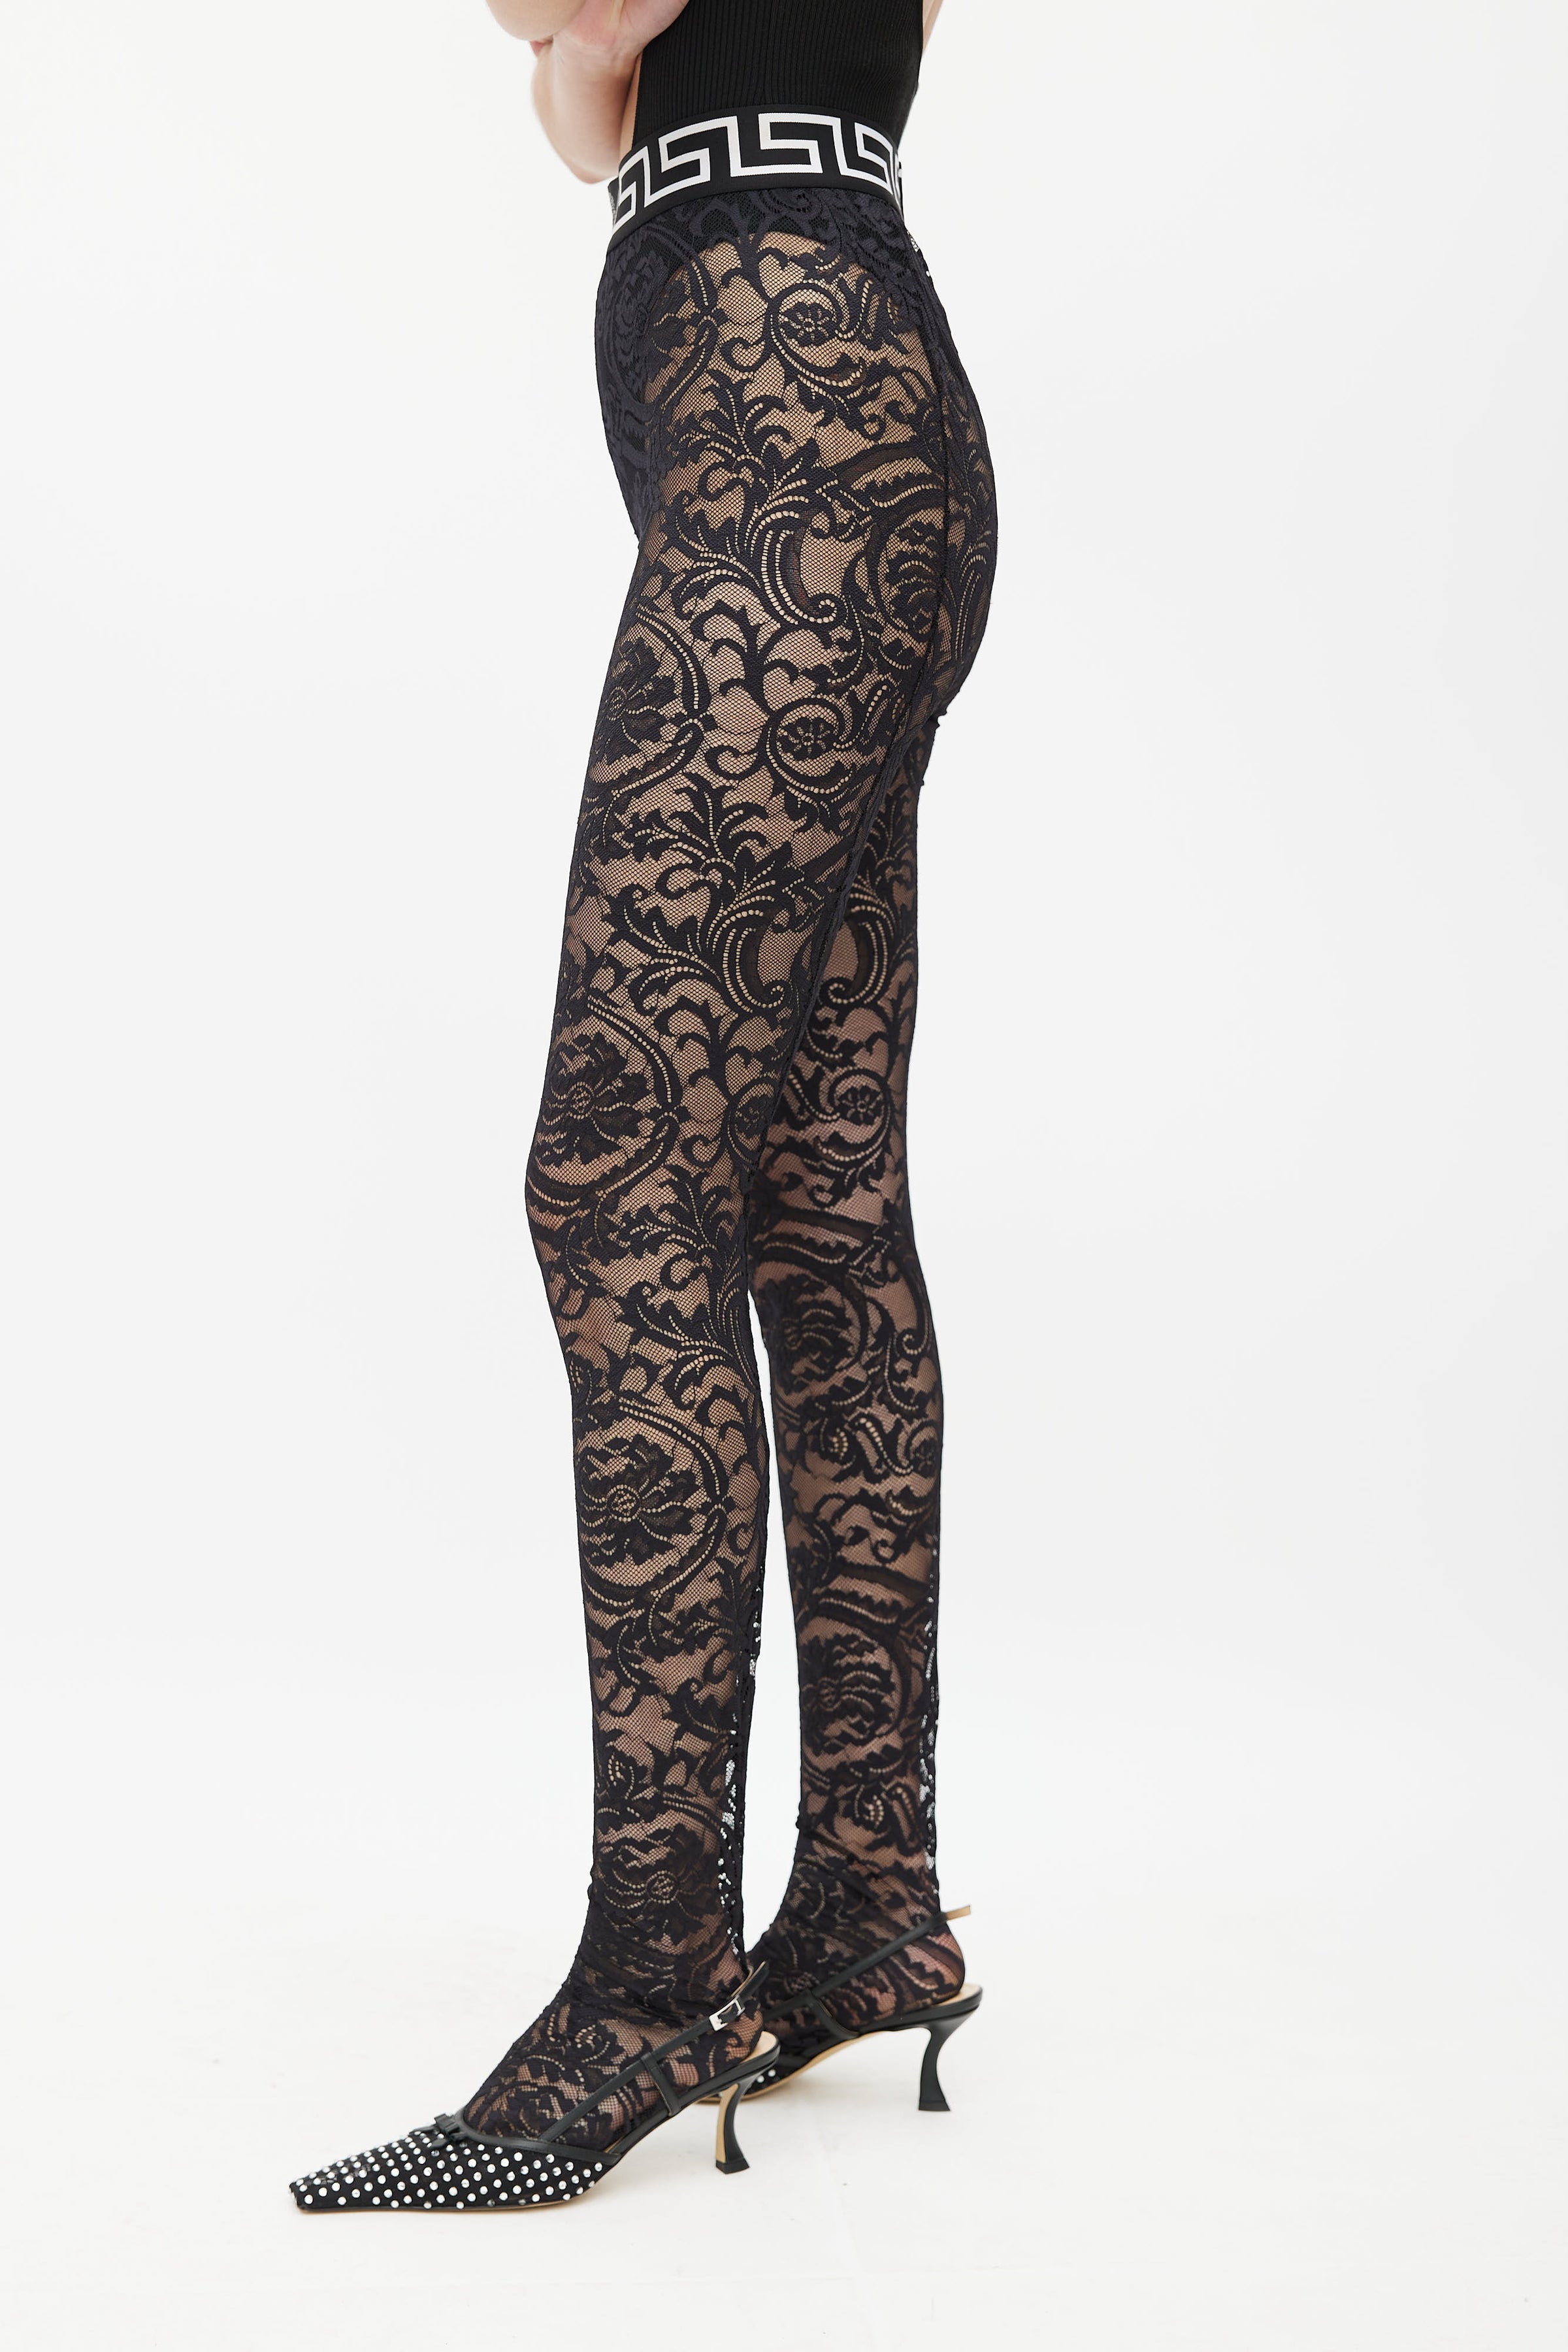 VERSACE WOMENS LACE PANELLED 2019 RUNWAY LEGGINGS SIZE 1 SMALL $900++